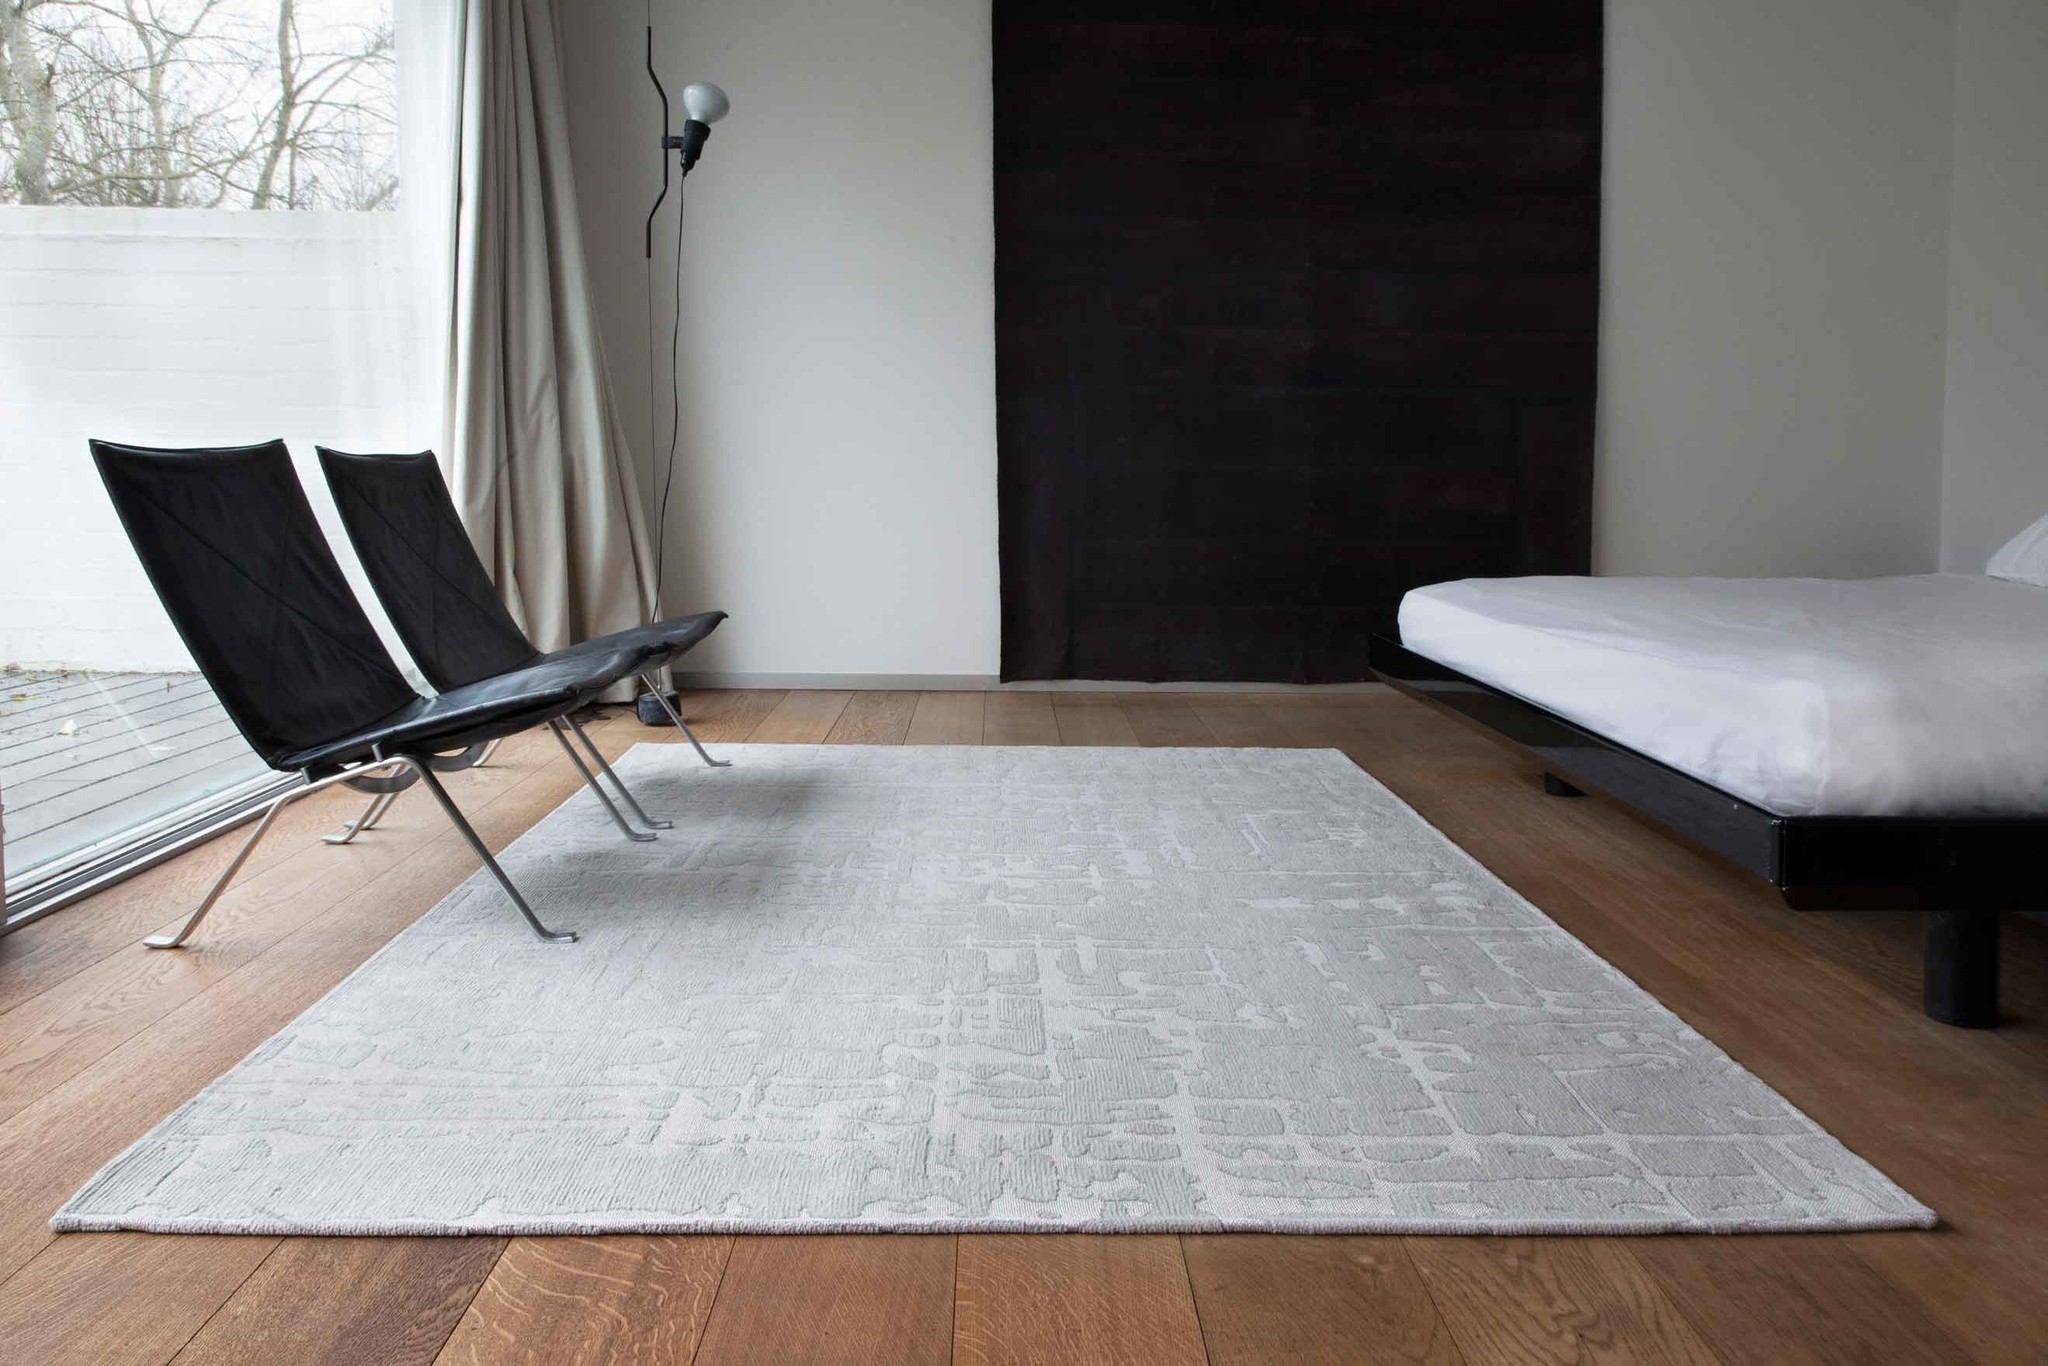 Abstract Silver Belgian Rug ☞ Size: 2' 7" x 5' (80 x 150 cm)